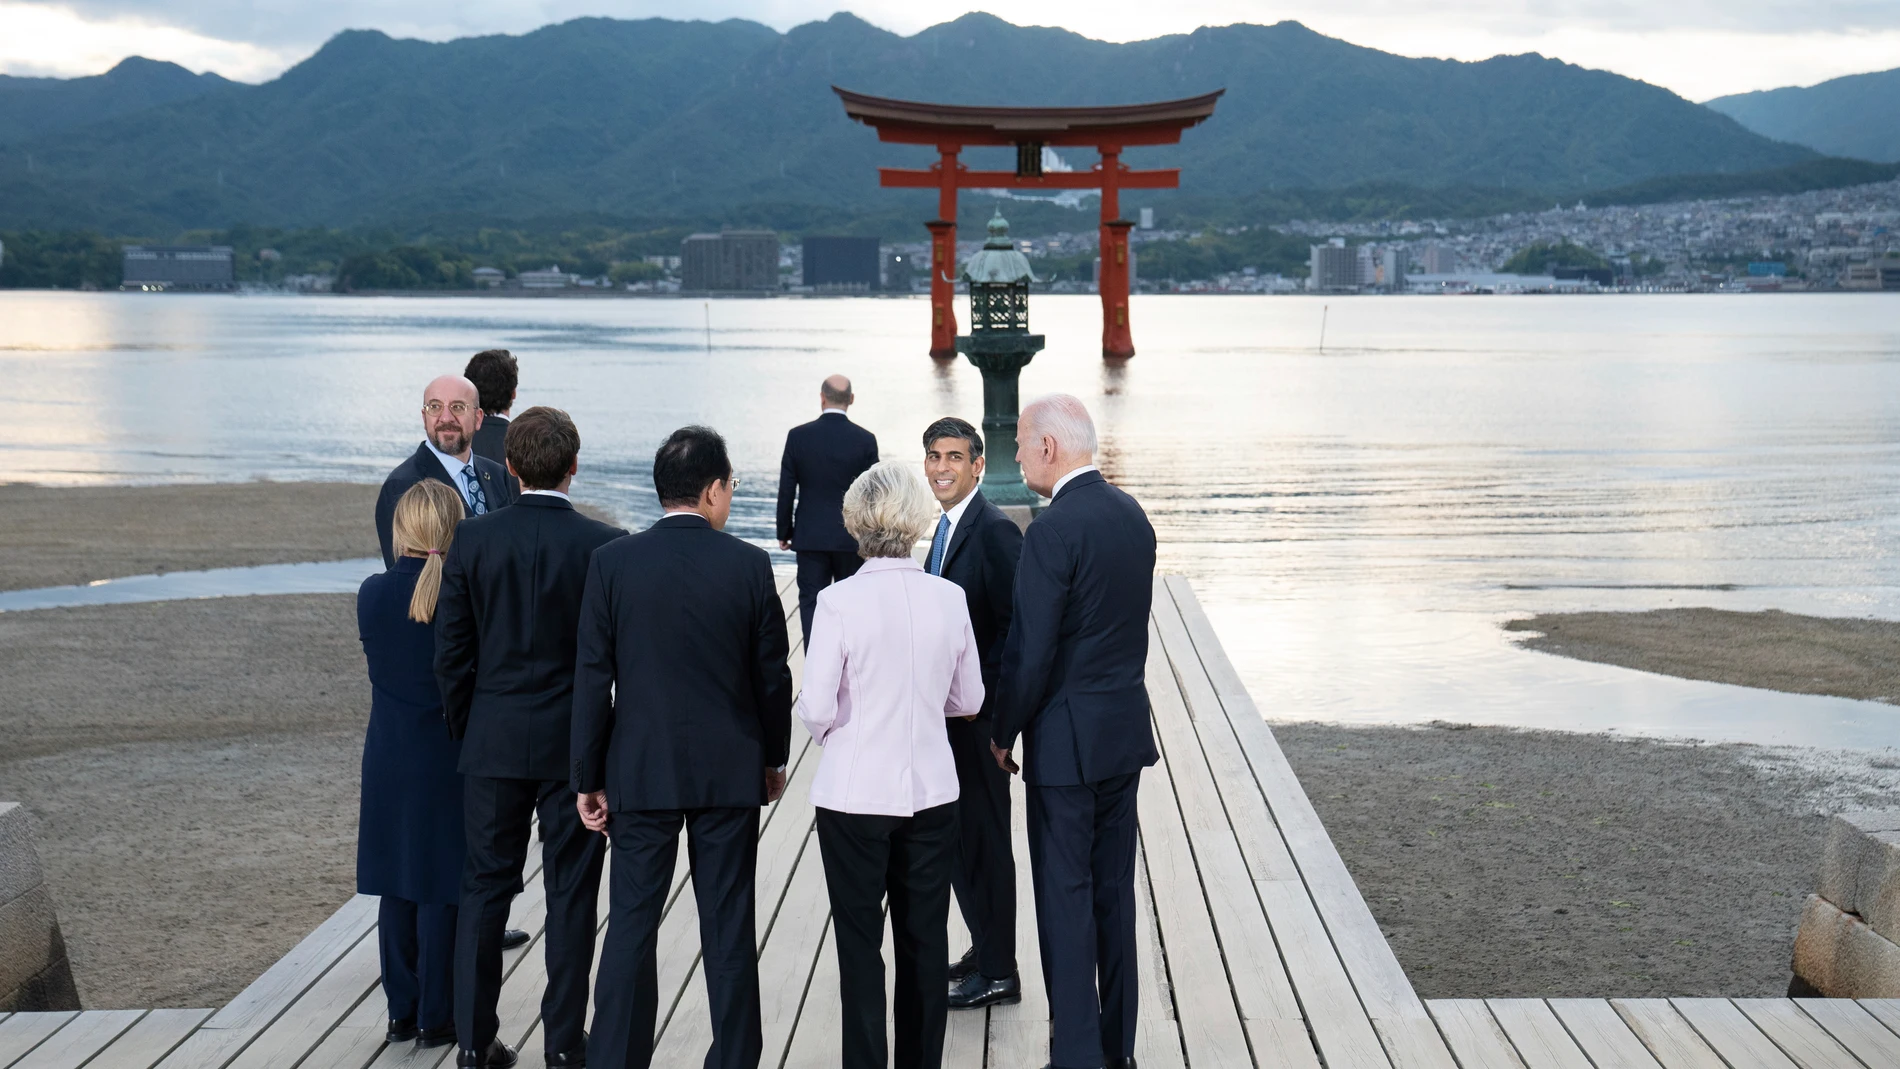 G7 leaders gather for the family photo at the Itsukushima Shrine in Hiroshima, western Japan, Friday, May 19, 2023. (Stefan Rousseau/Pool Photo via AP)